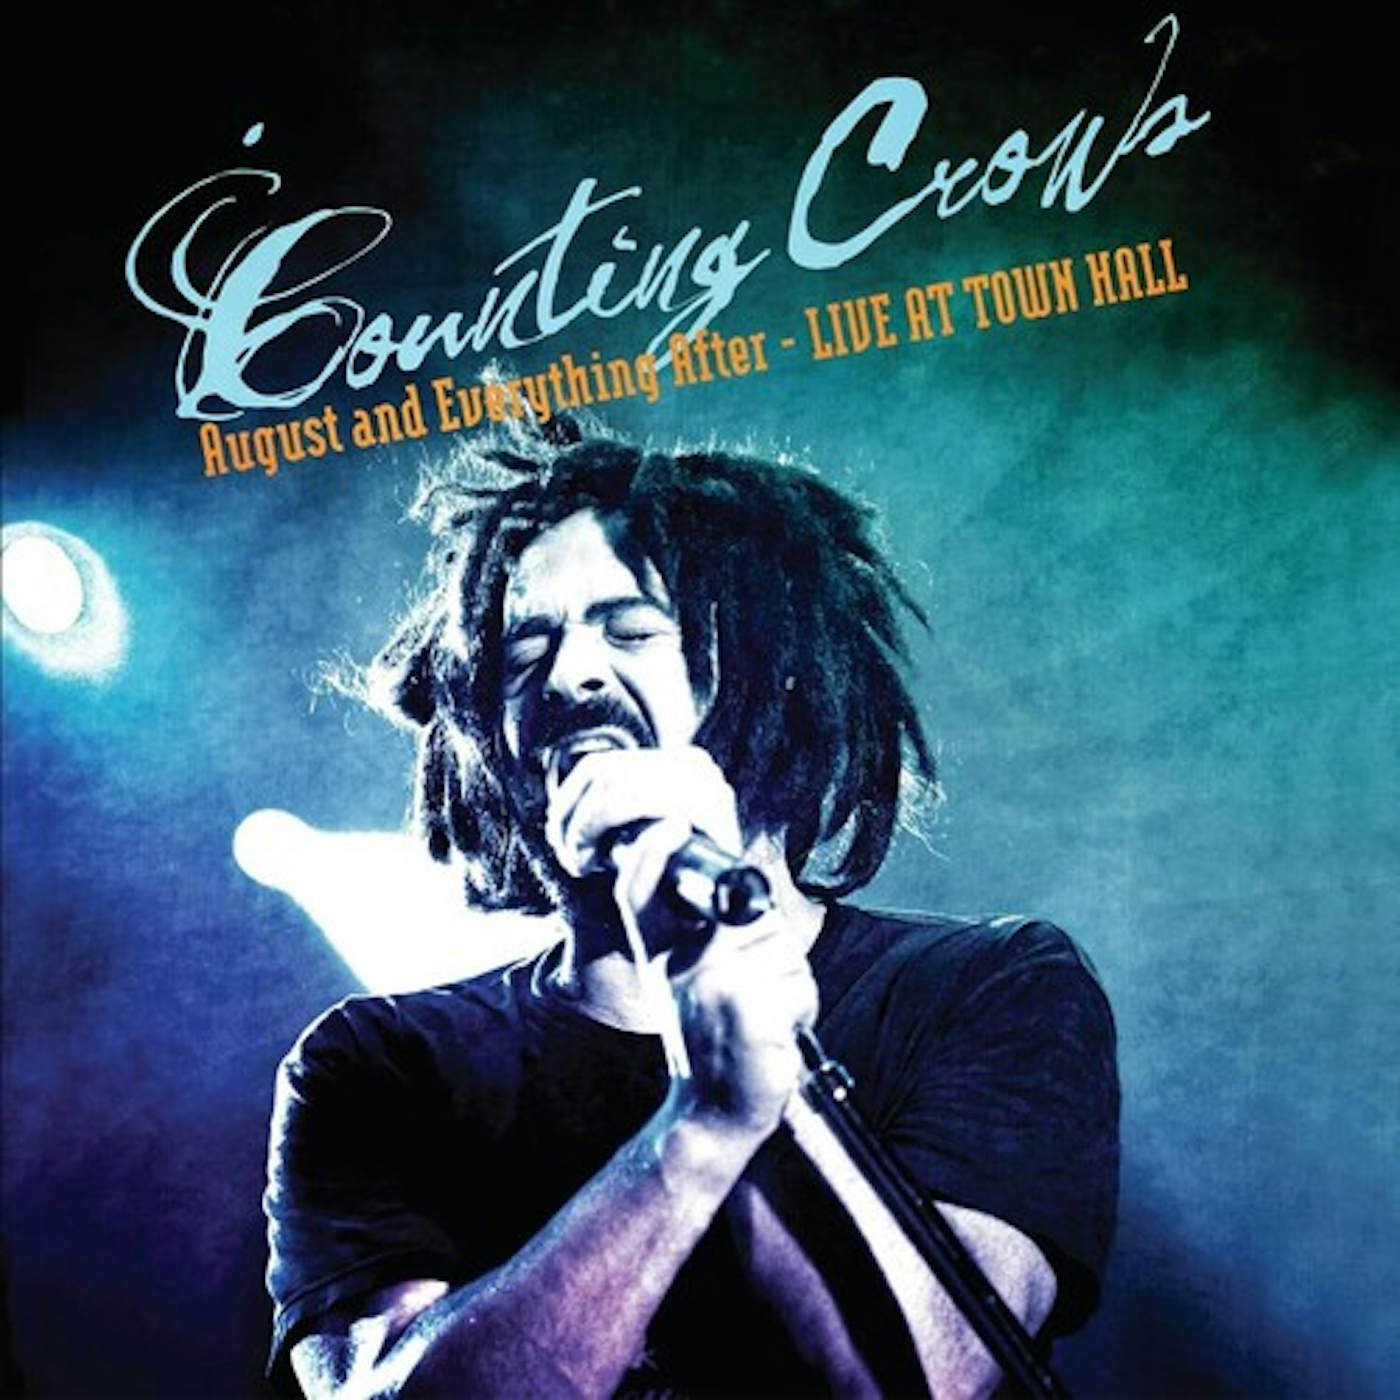 Counting Crows AUGUST AND EVERYTHING AFTER - LIVE AT TOWN HALL DVD